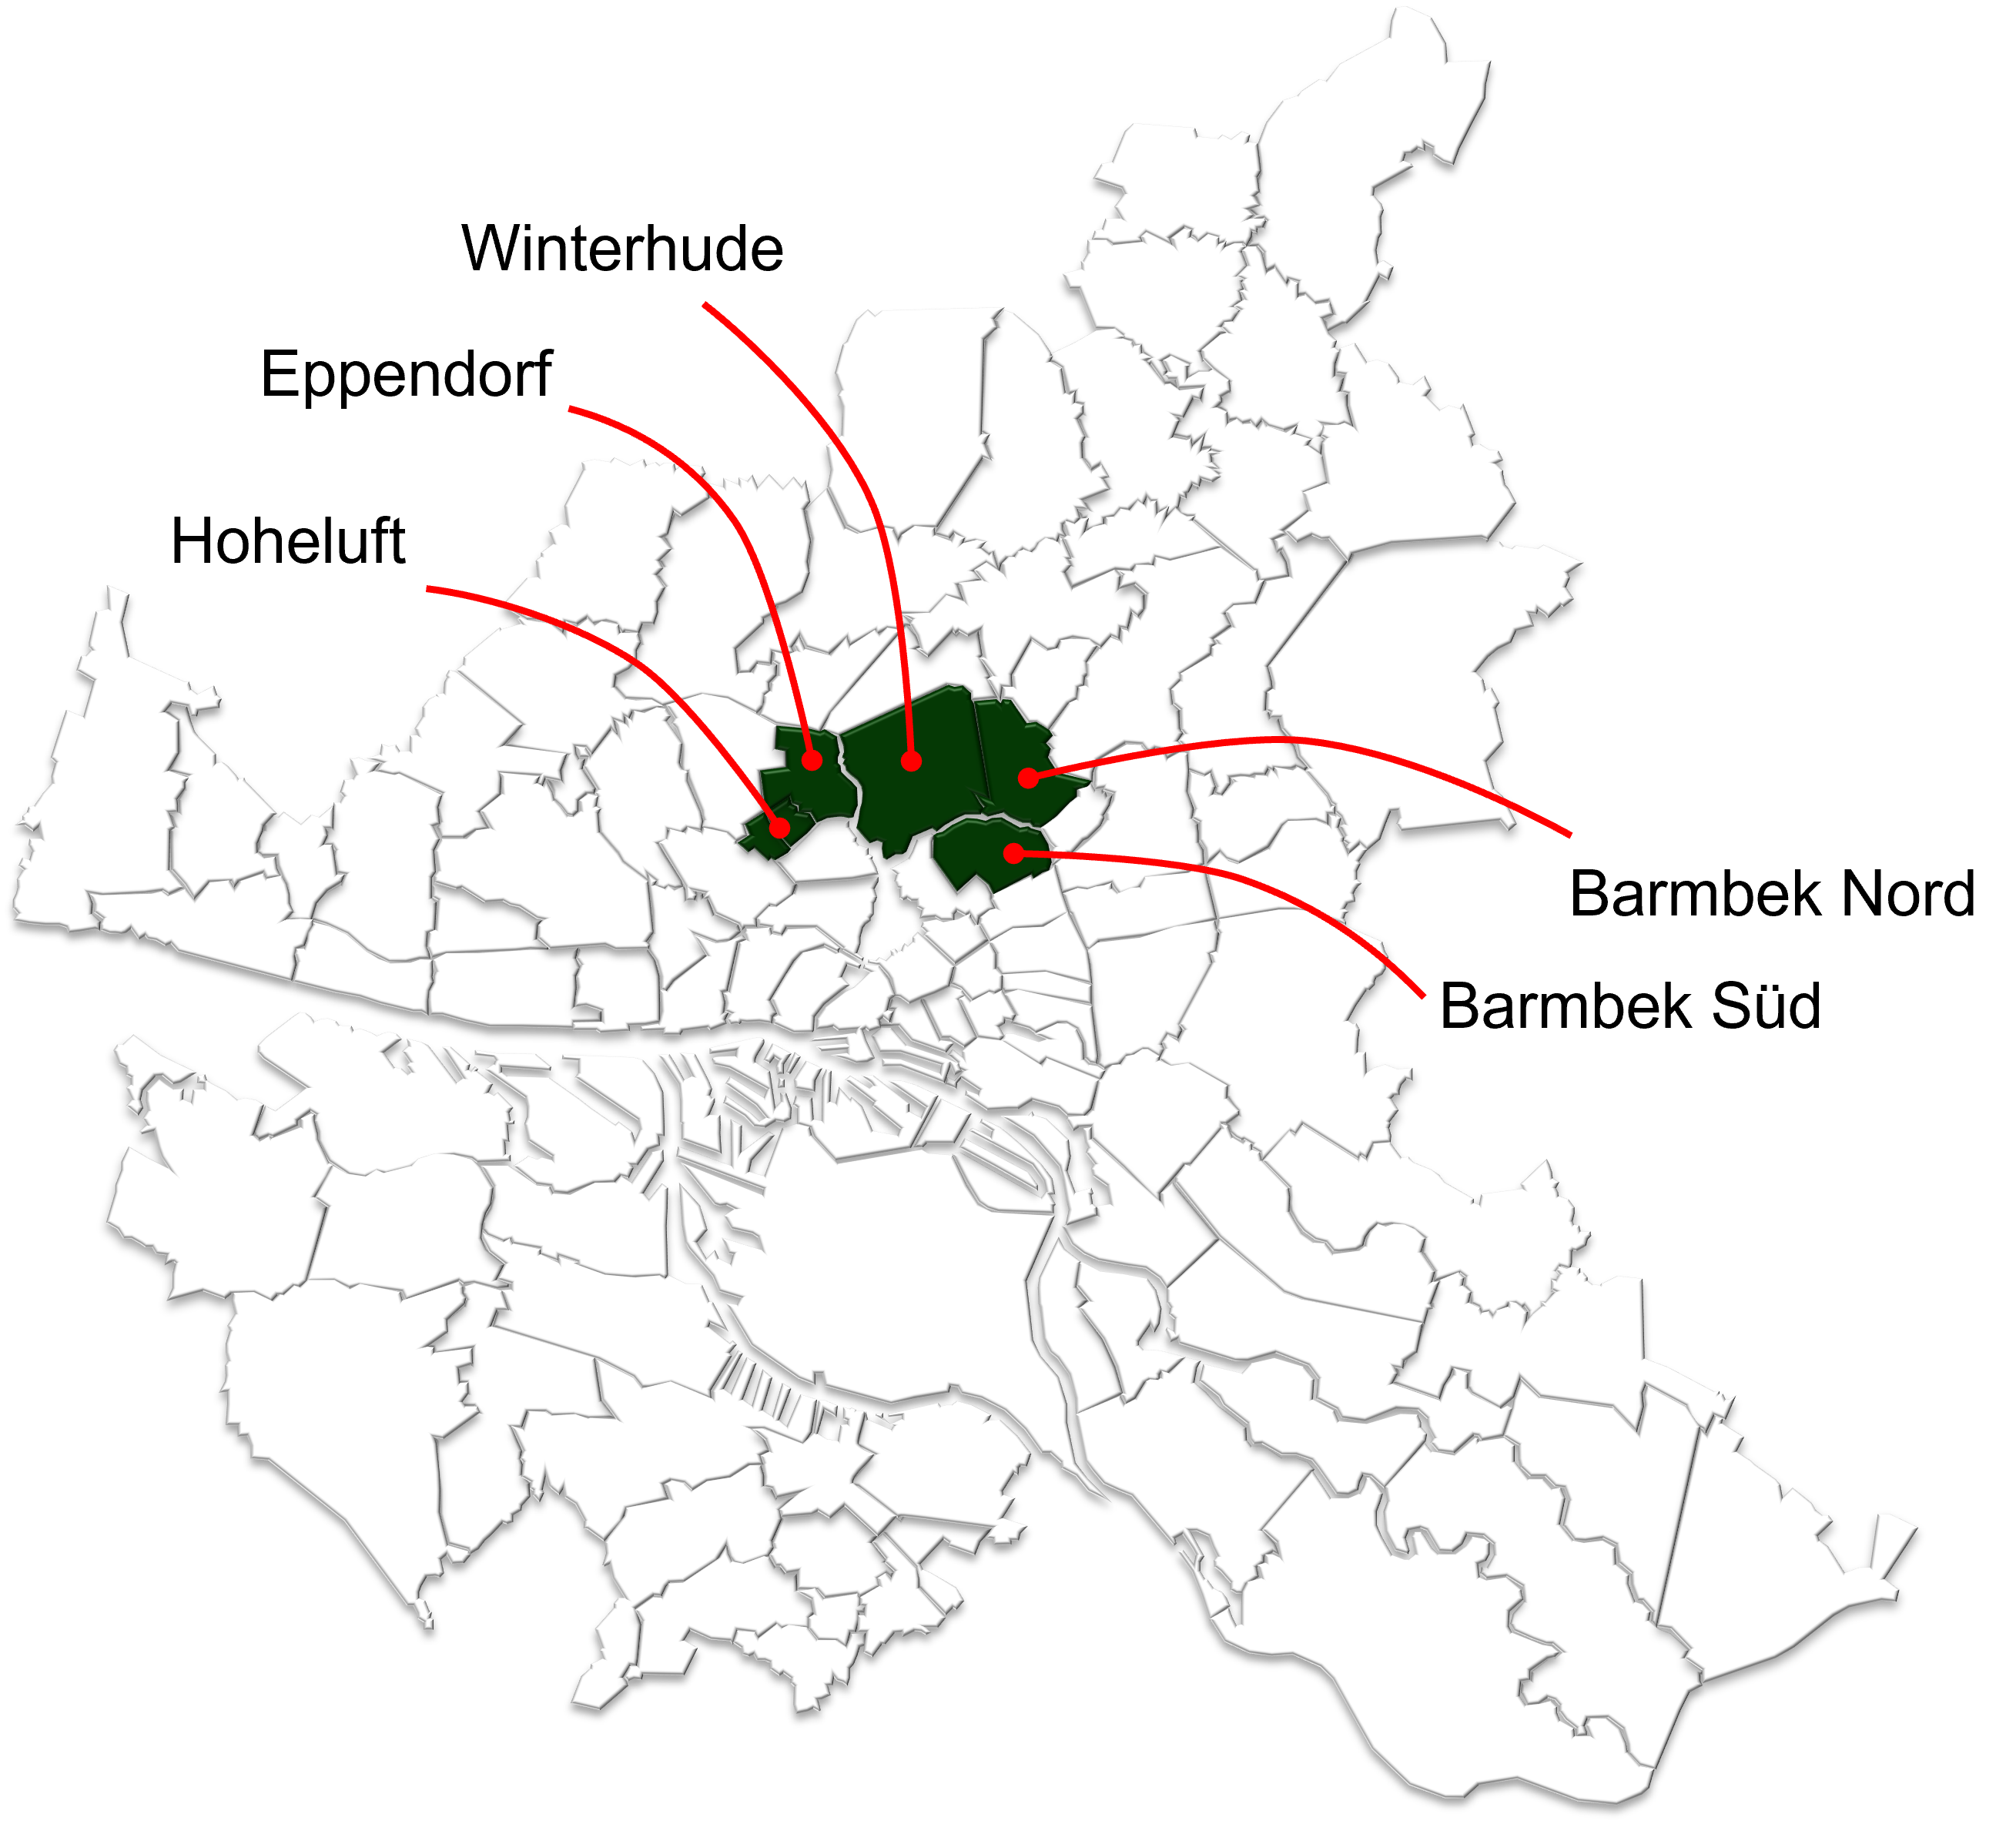 The district Barmbek-Nord is in the central nord of Hamburg